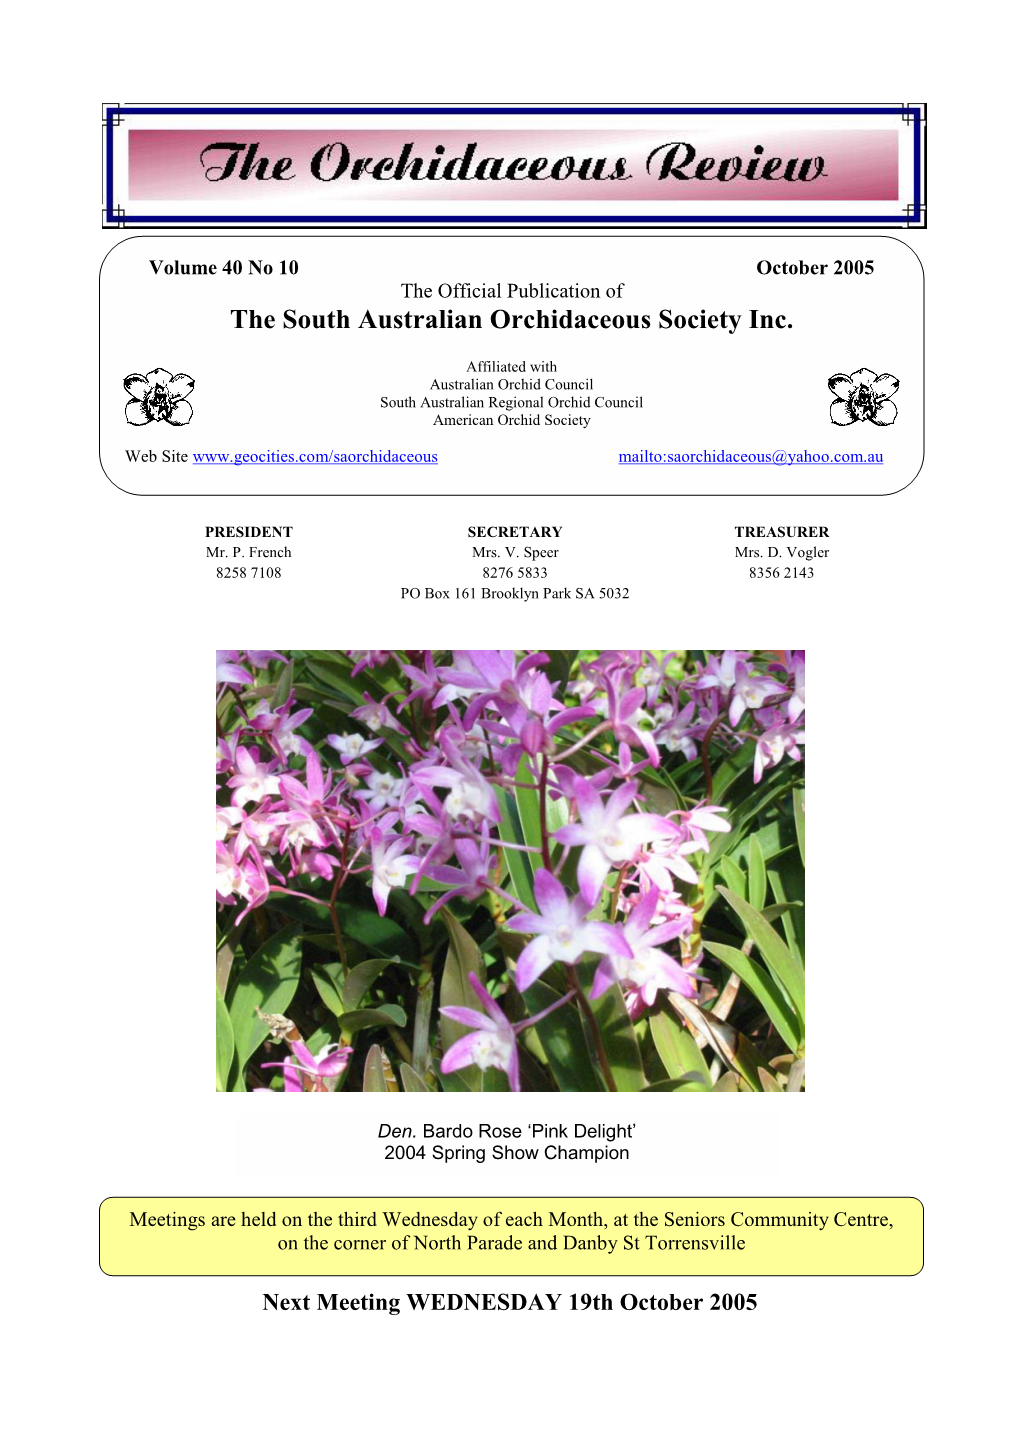 The South Australian Orchidaceous Society Inc